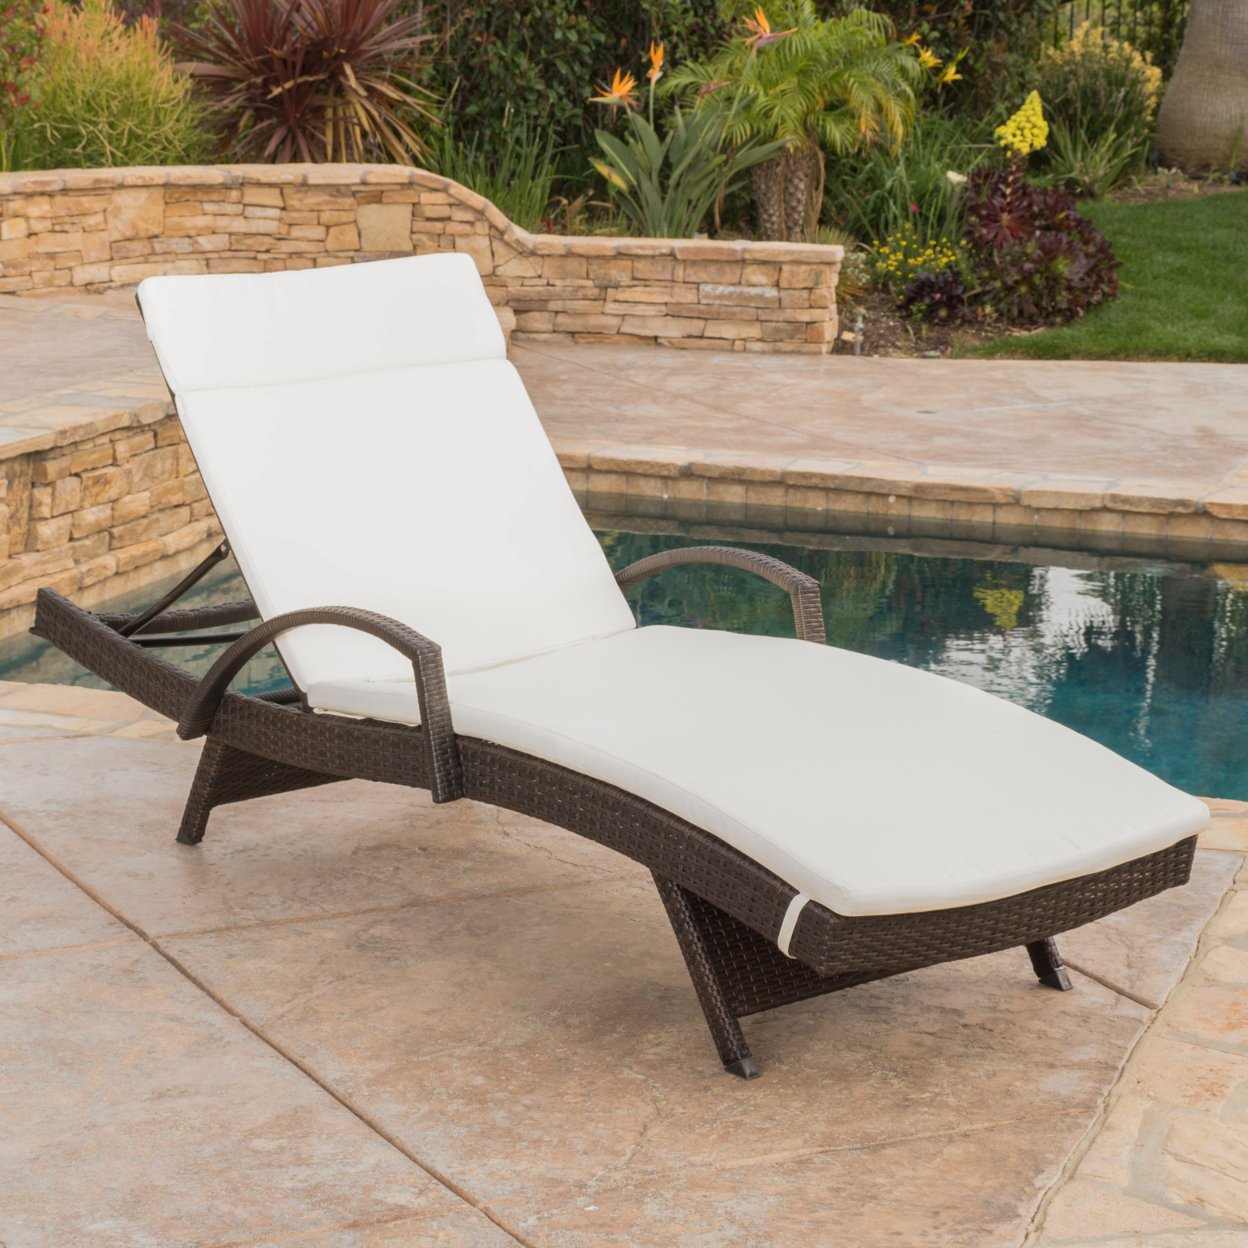 Lakeport Outdoor Adjustable Armed Chaise Lounge Chair With Cushion - Caramel Cushion